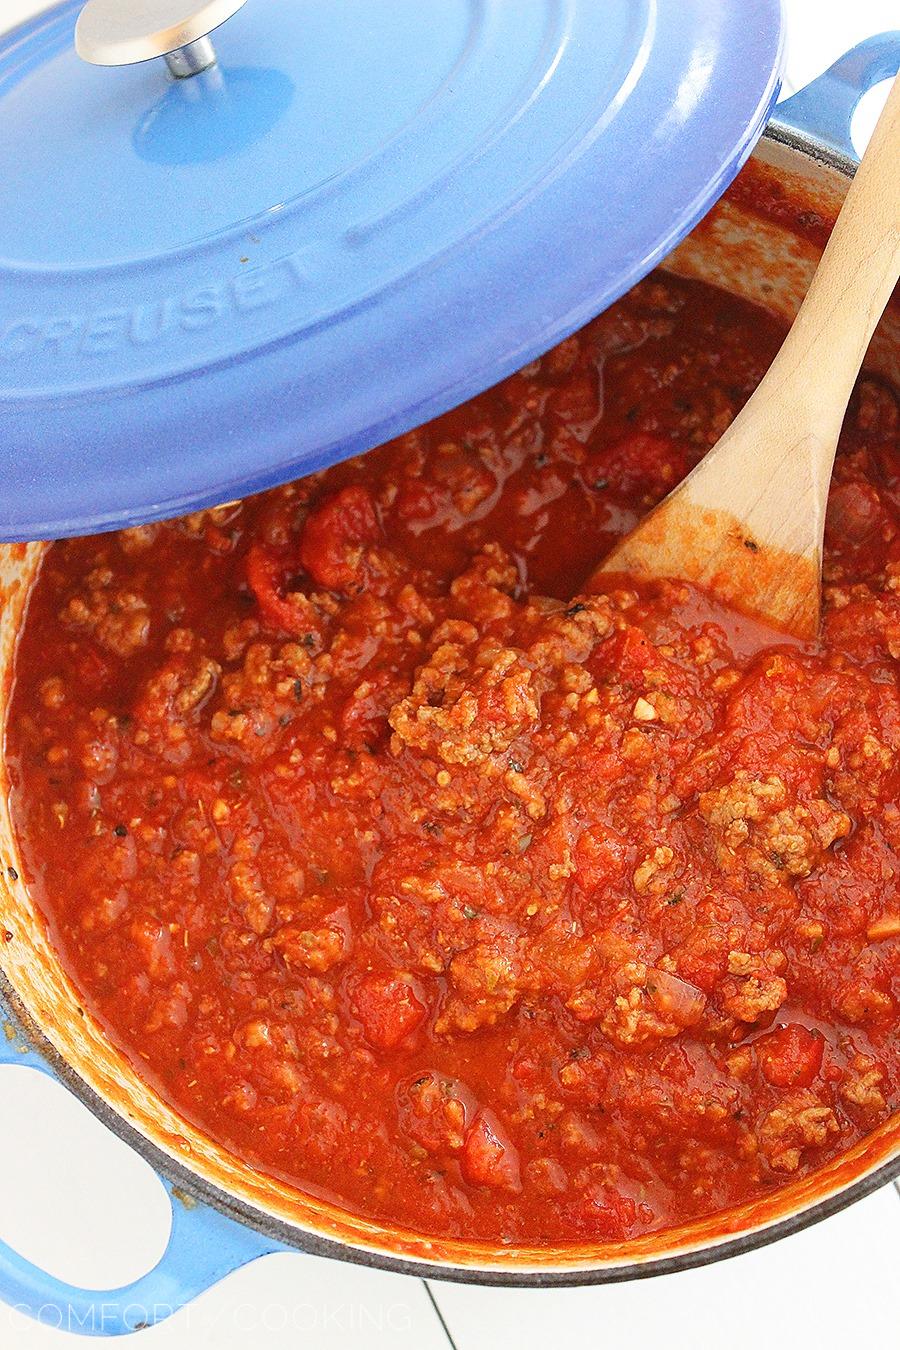 30-Minute Weeknight Pasta Sauce – Simmer this scrumptious, meaty pasta sauce for just 30 minutes, serve a salad alongside, and dinner is done! | thecomfortofcooking.com